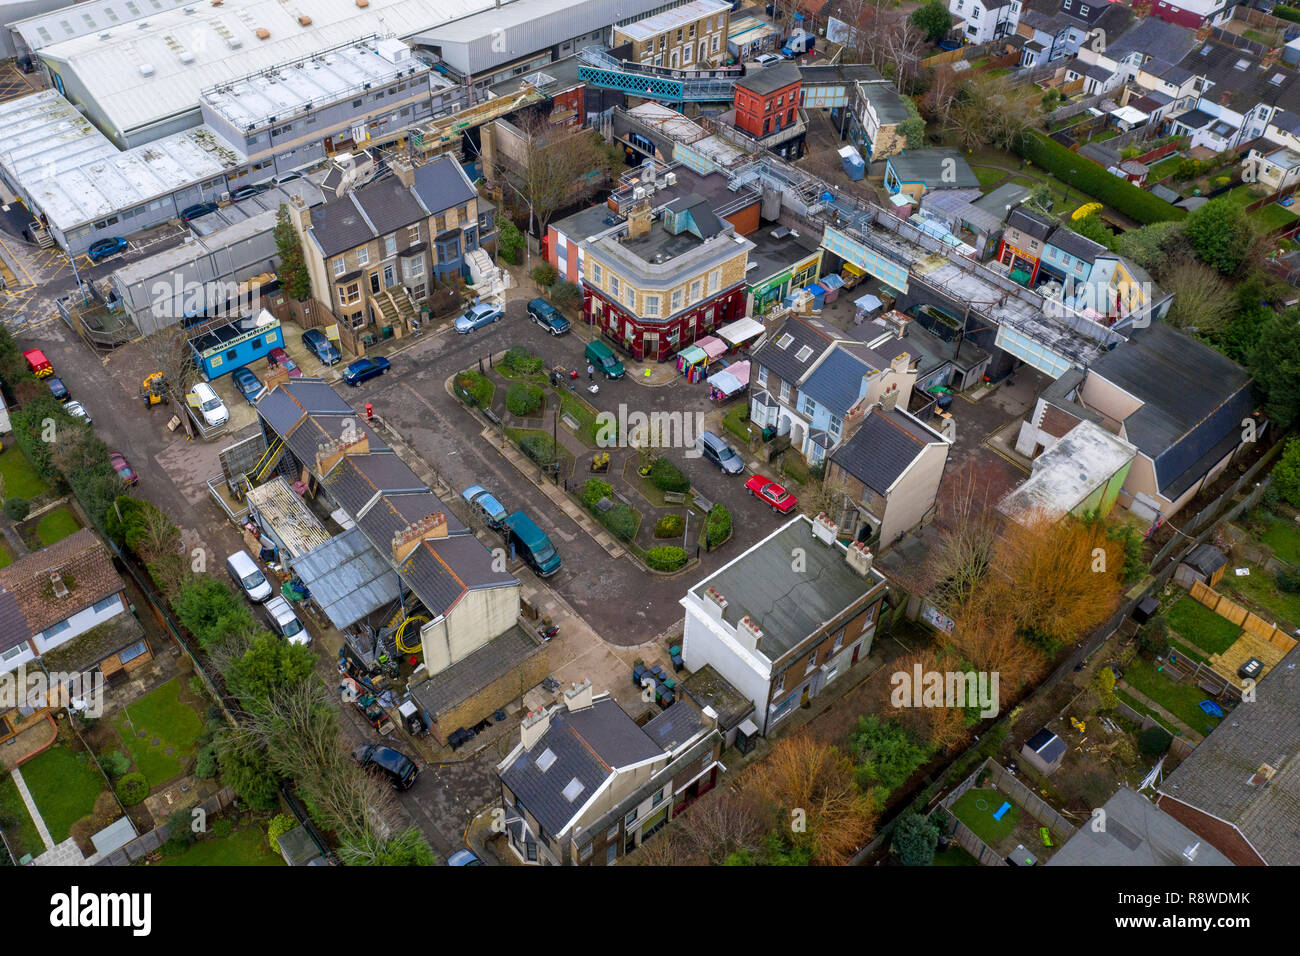 Pic shows an aerial view of the Eastenders set in Elstree / Borehamwood. Stock Photo